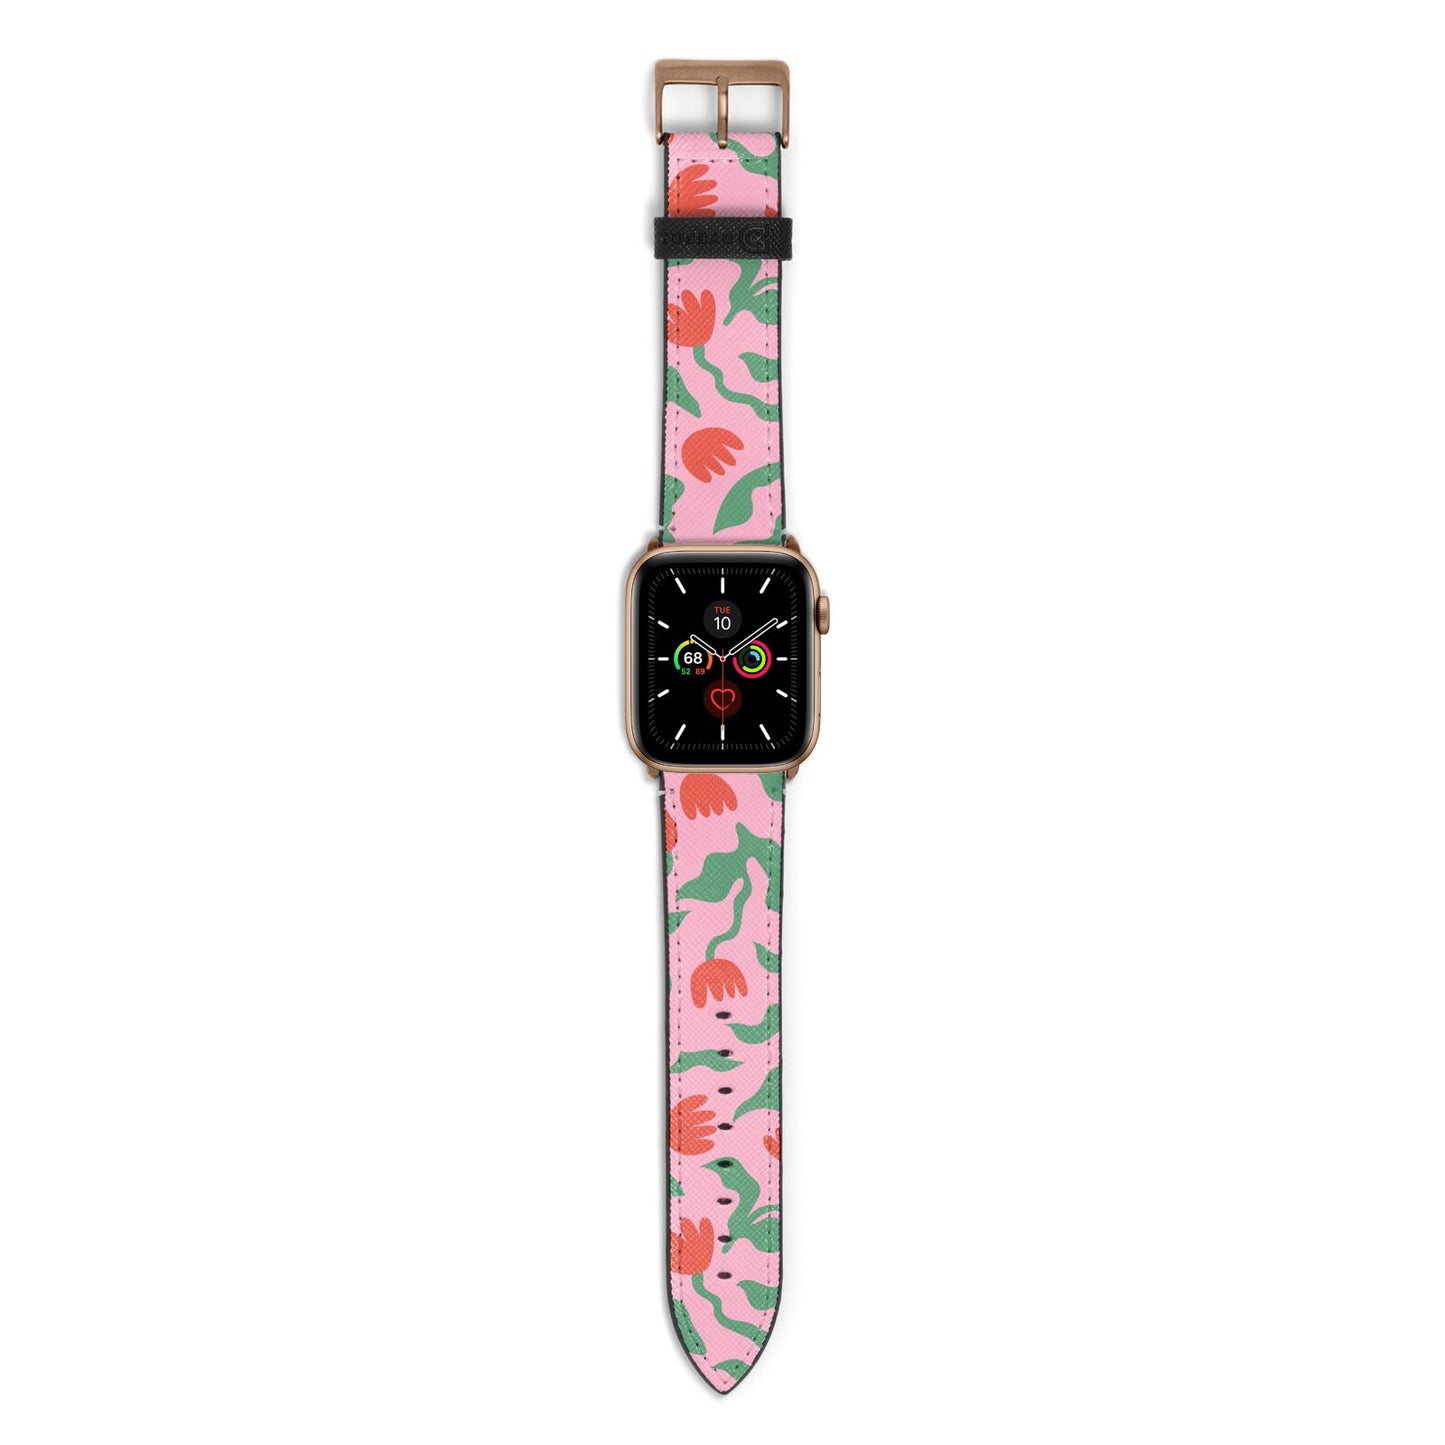 Simple Floral Apple Watch Strap with Gold Hardware